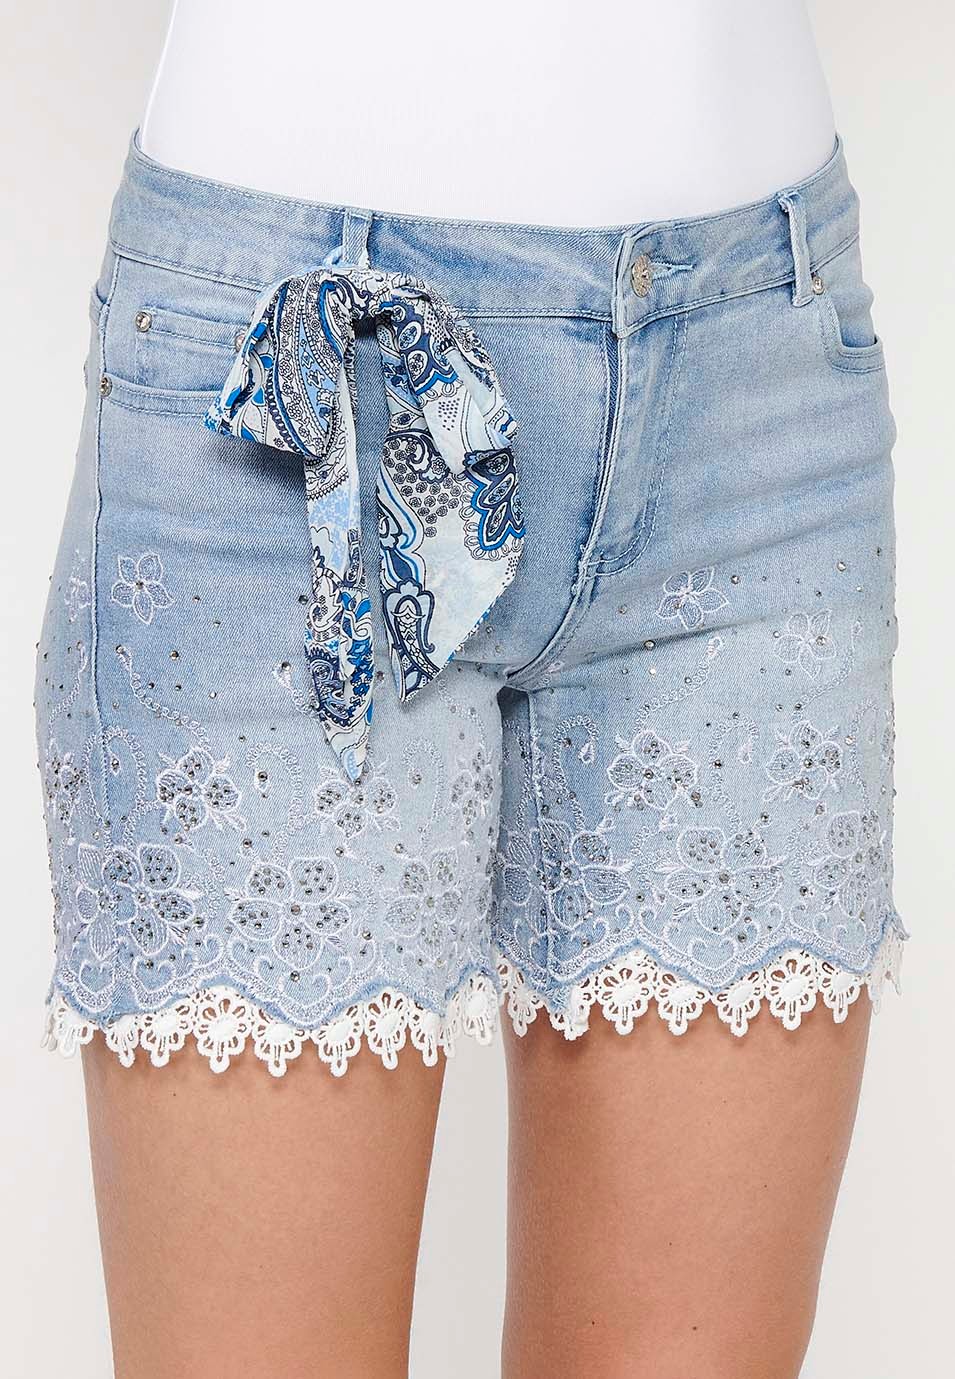 Short denim shorts finished with lace and floral embroidery with front closure with zipper and button with removable bow detail in Blue for Women 6